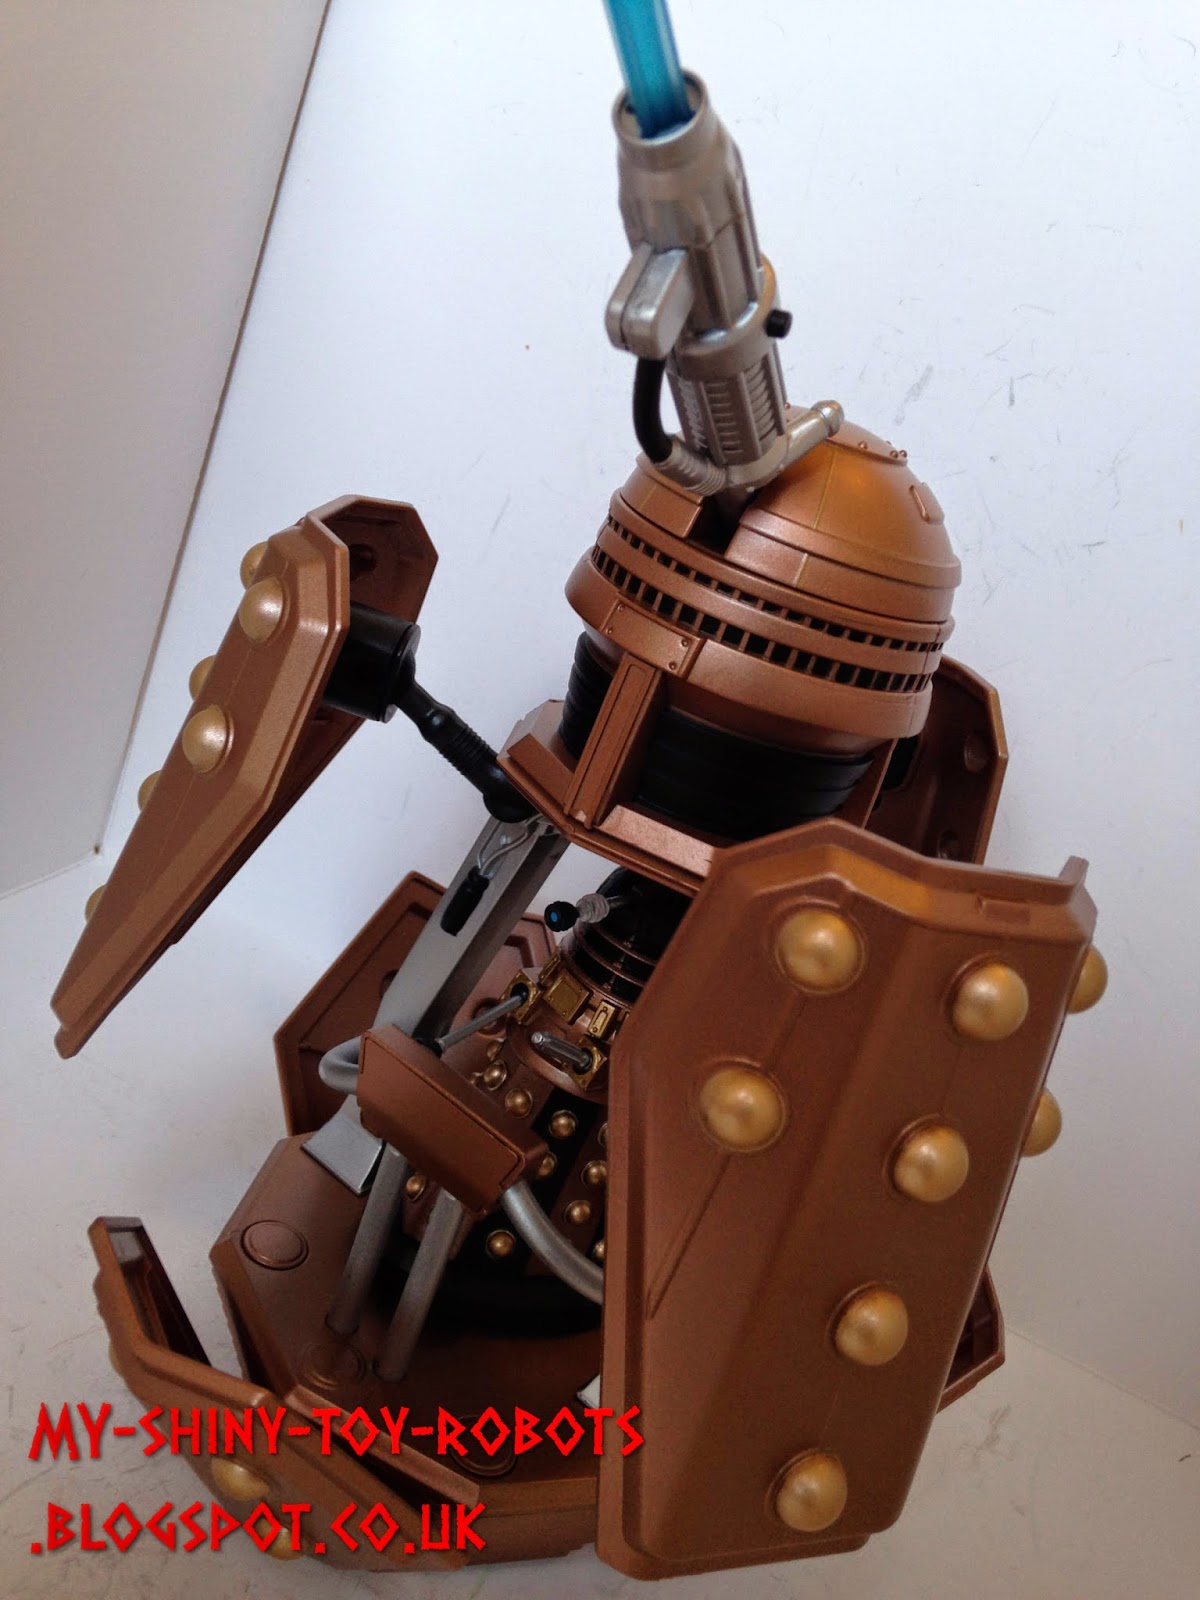 The Time War continues!